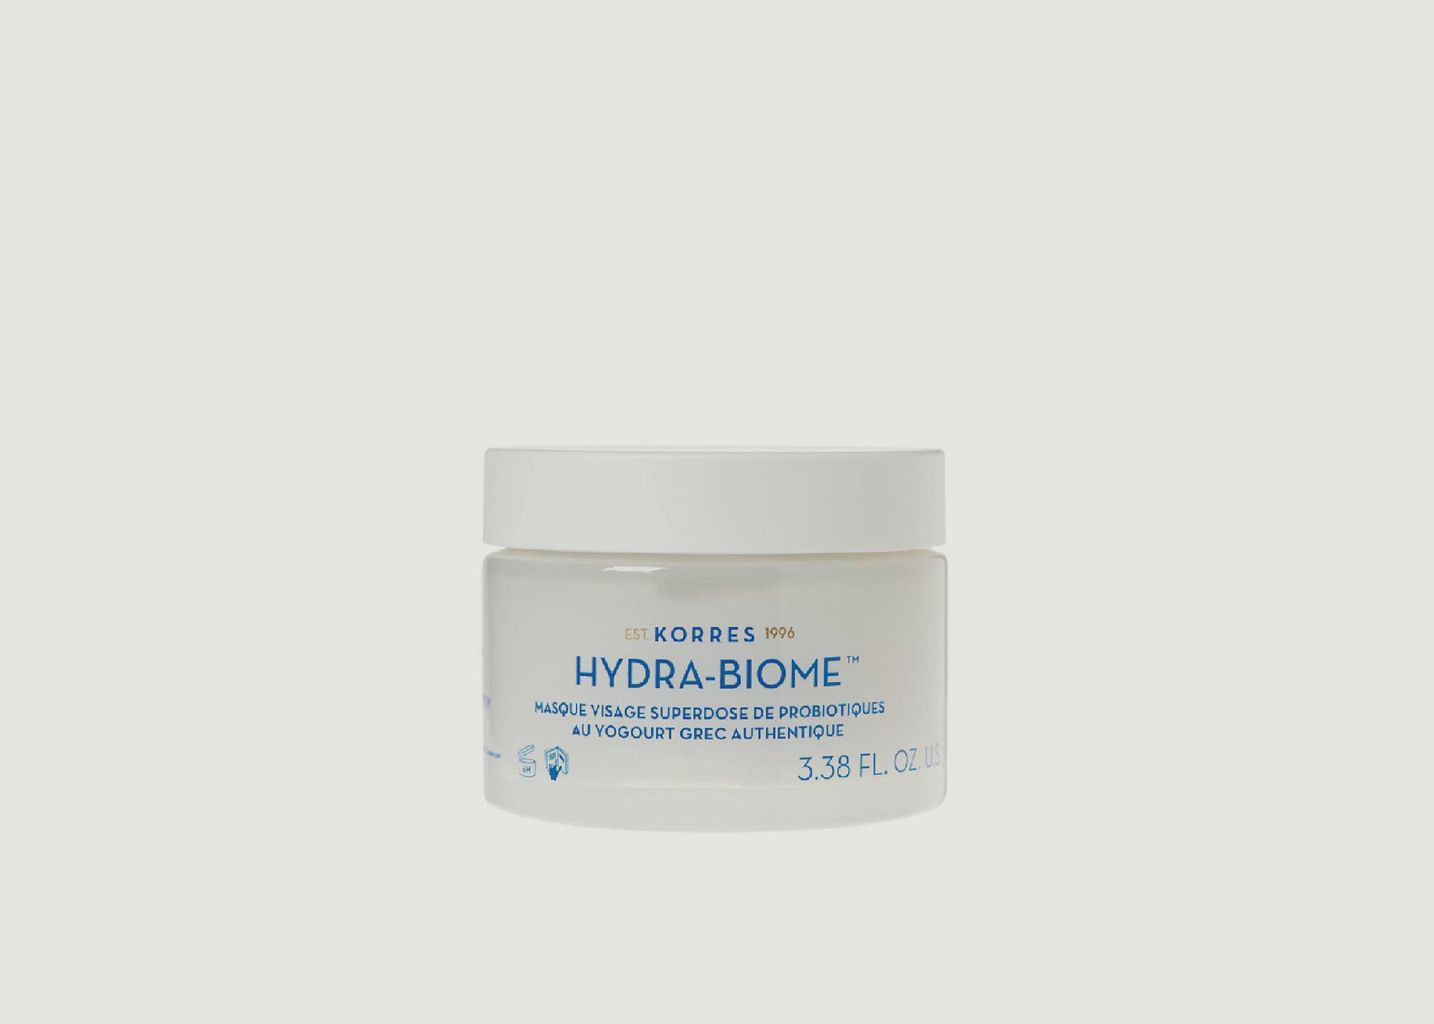 Hydra-biome face mask - Korres